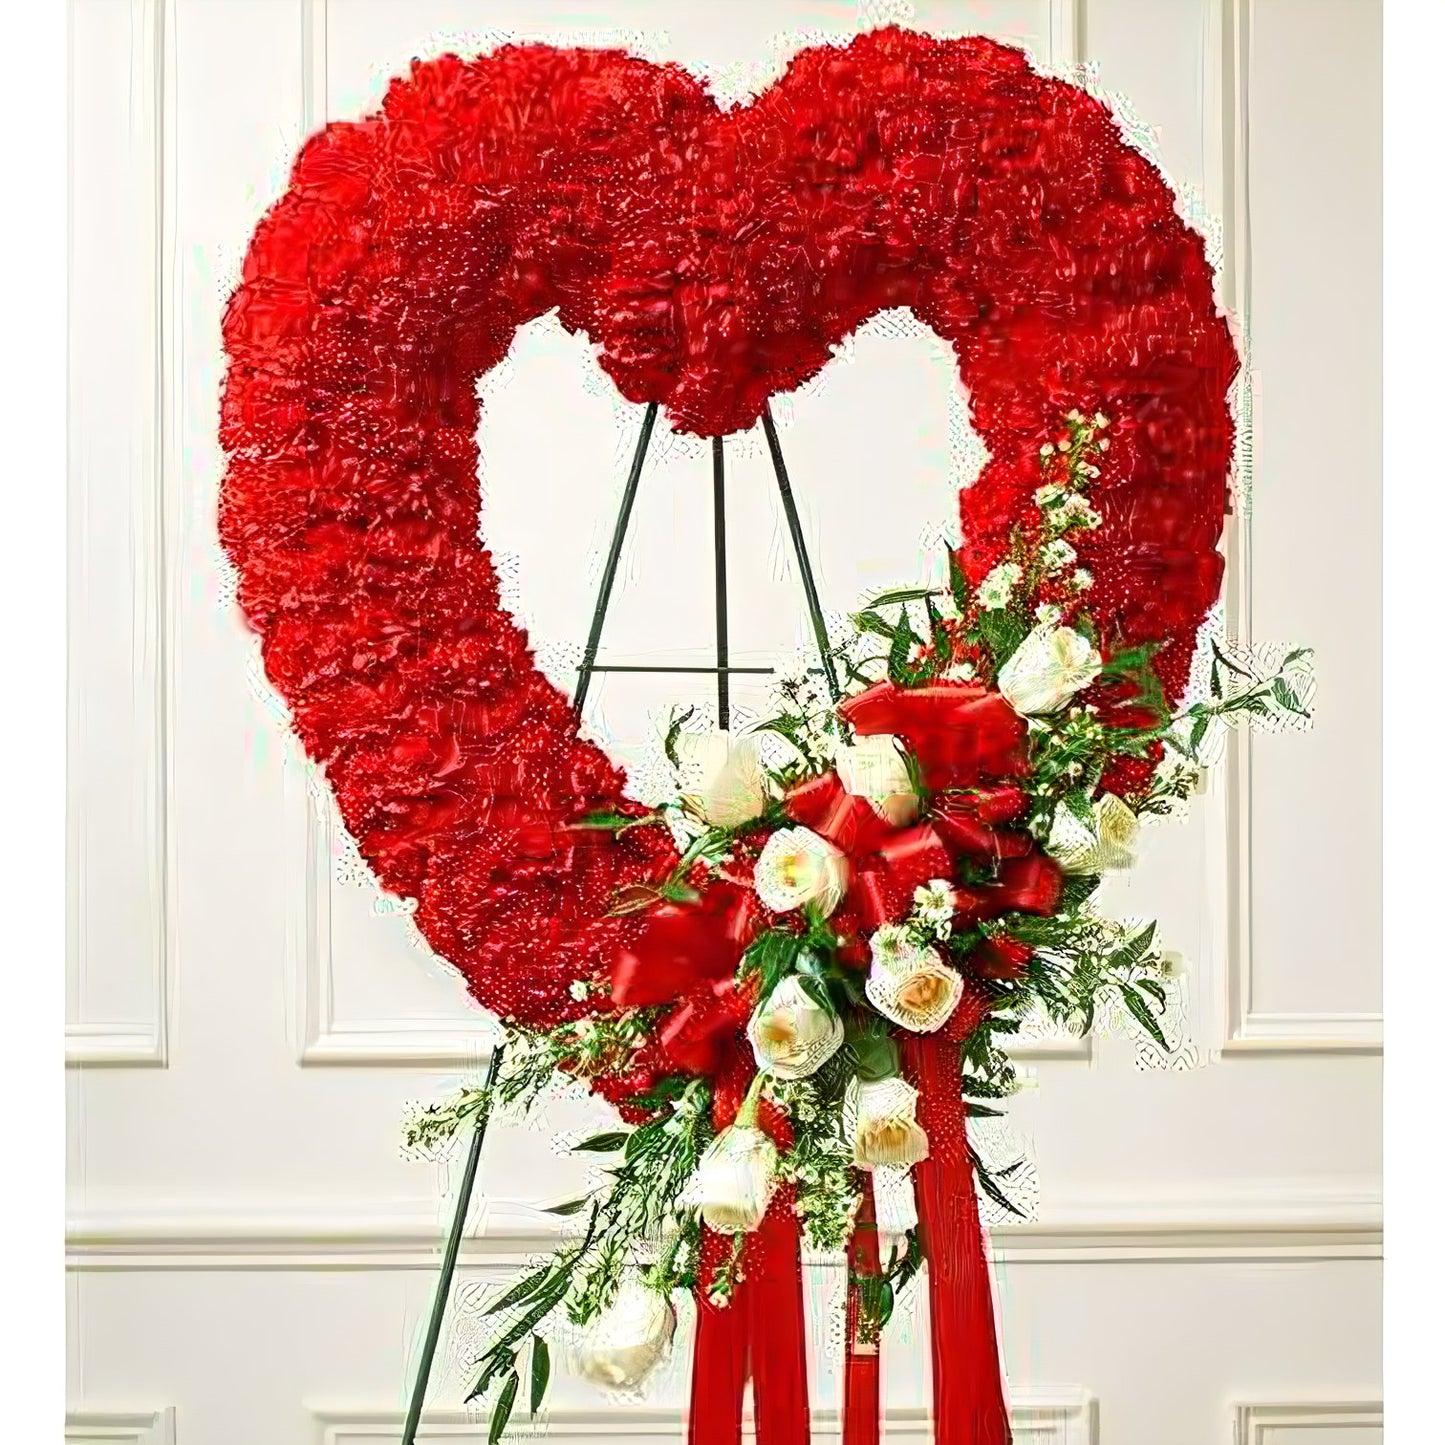 Red and White Open Heart with White Roses - Floral_Arrangement - Flower Delivery NYC